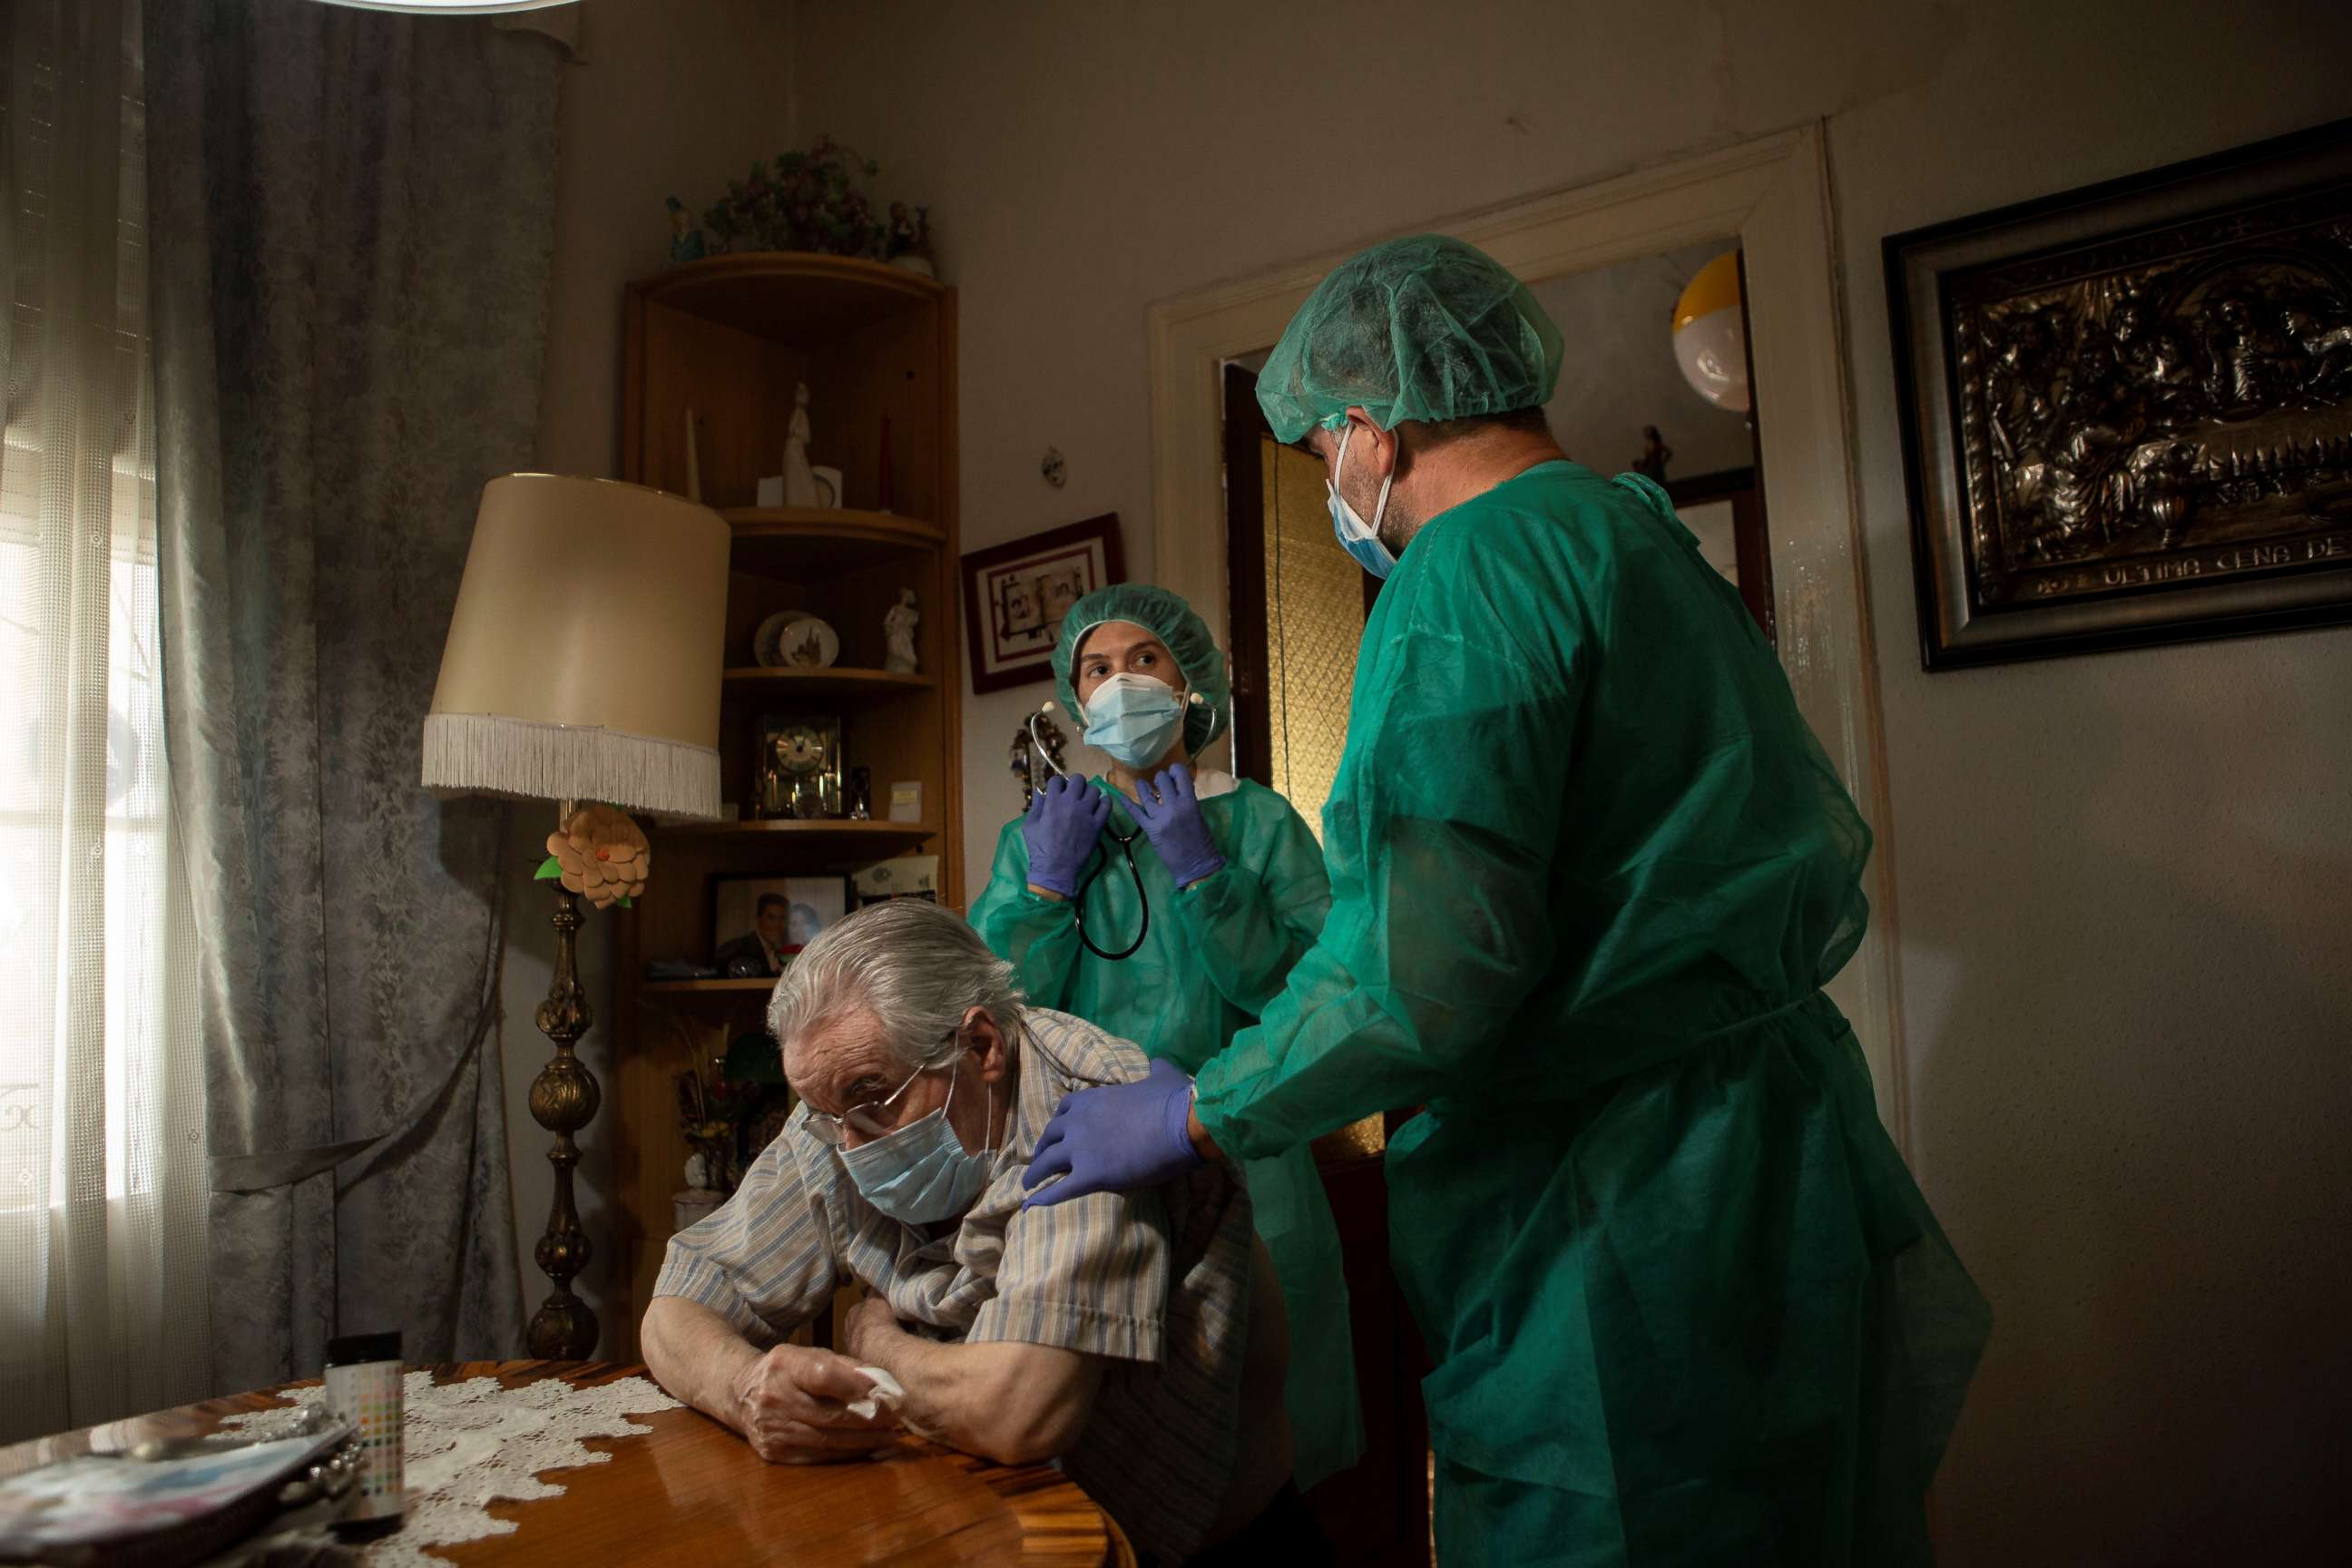 PHOTO: Medical personnel care for a patient during a house call visit in Barcelona, Spain, May 23, 2020. These home services during the Covid-19 pandemic provide tests and care to people with low mobility or on isolation.